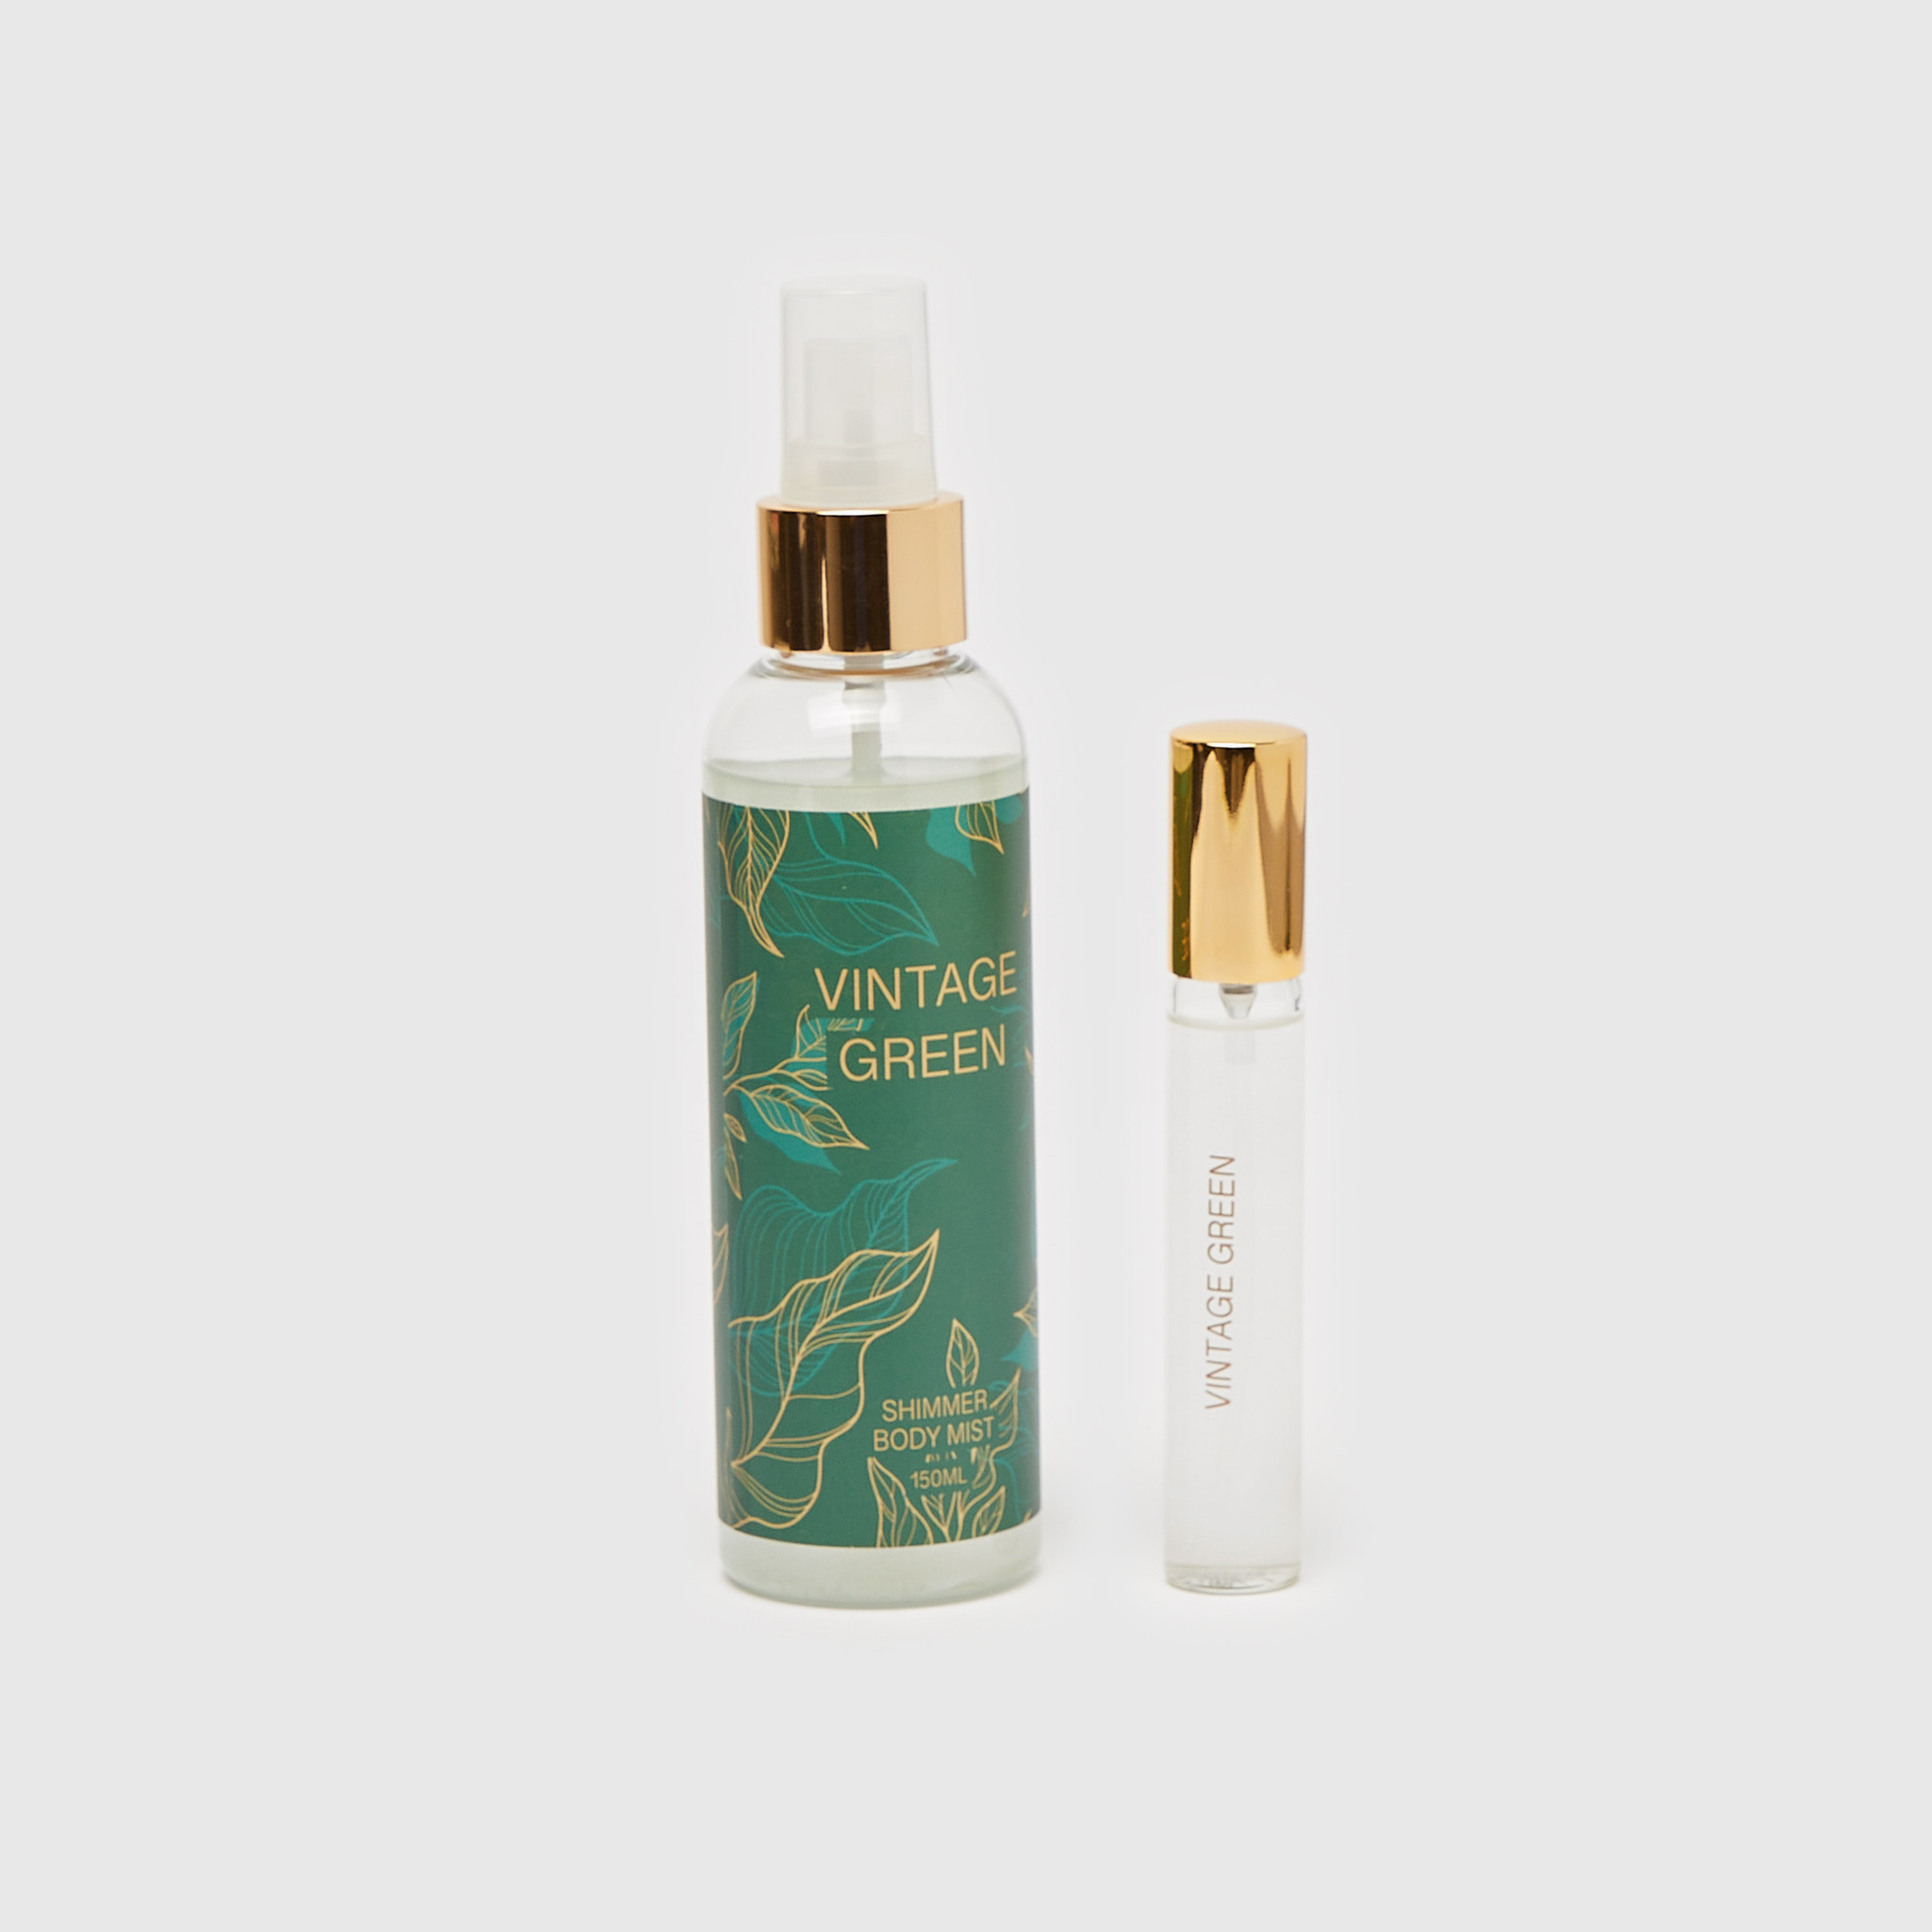 Shop Vintage Green 2-Piece Shimmer Body Mist and Perfume Set 